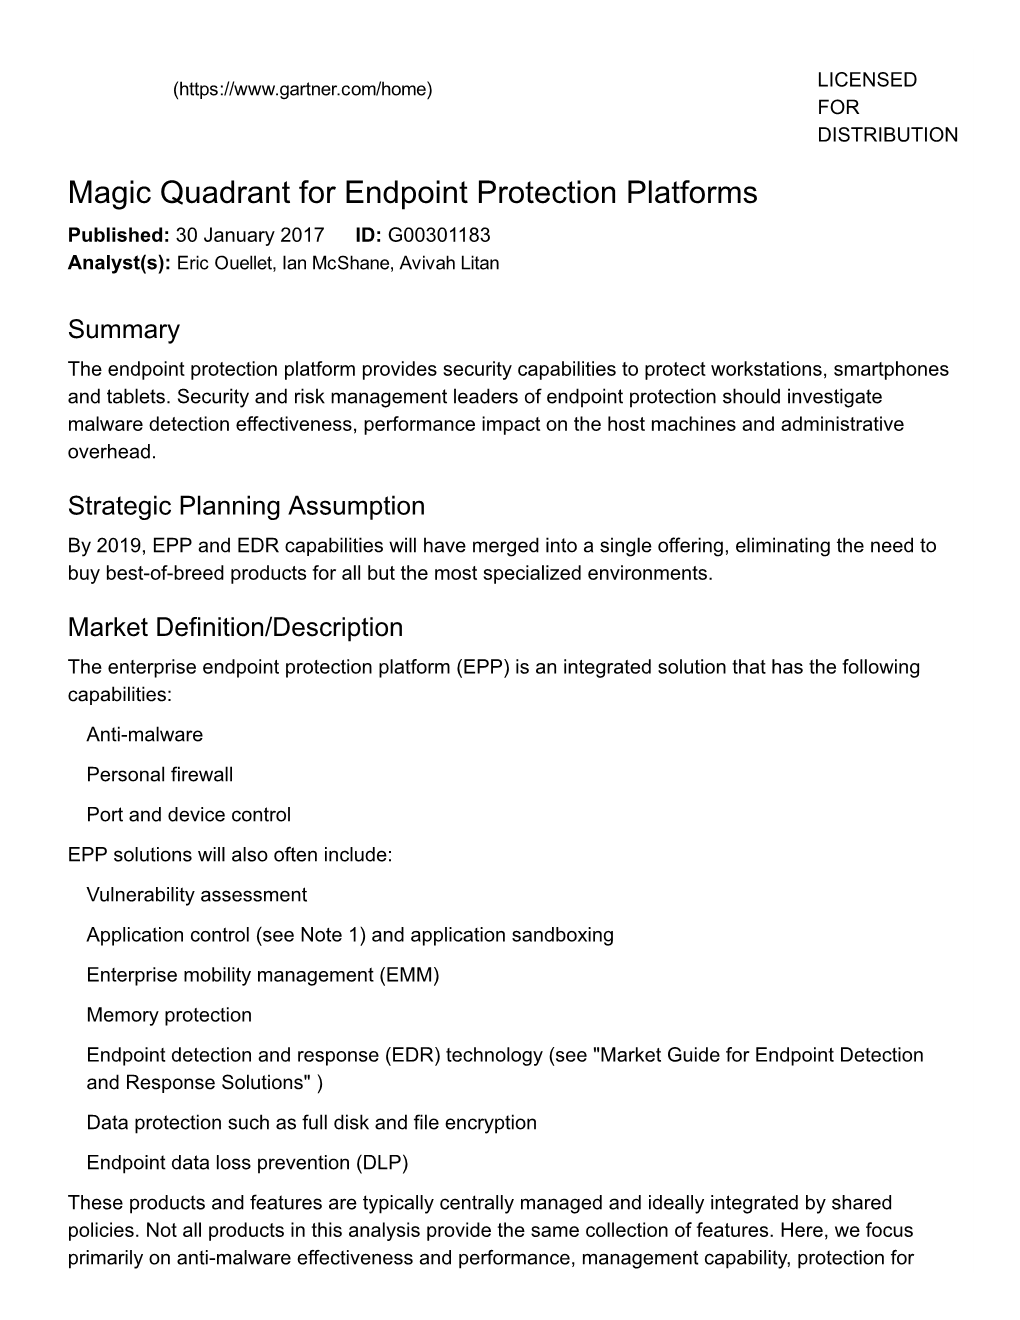 Magic Quadrant for Endpoint Protection Platforms Published: 30 January 2017 ID: G00301183 Analyst(S): Eric Ouellet, Ian Mcshane, Avivah Litan